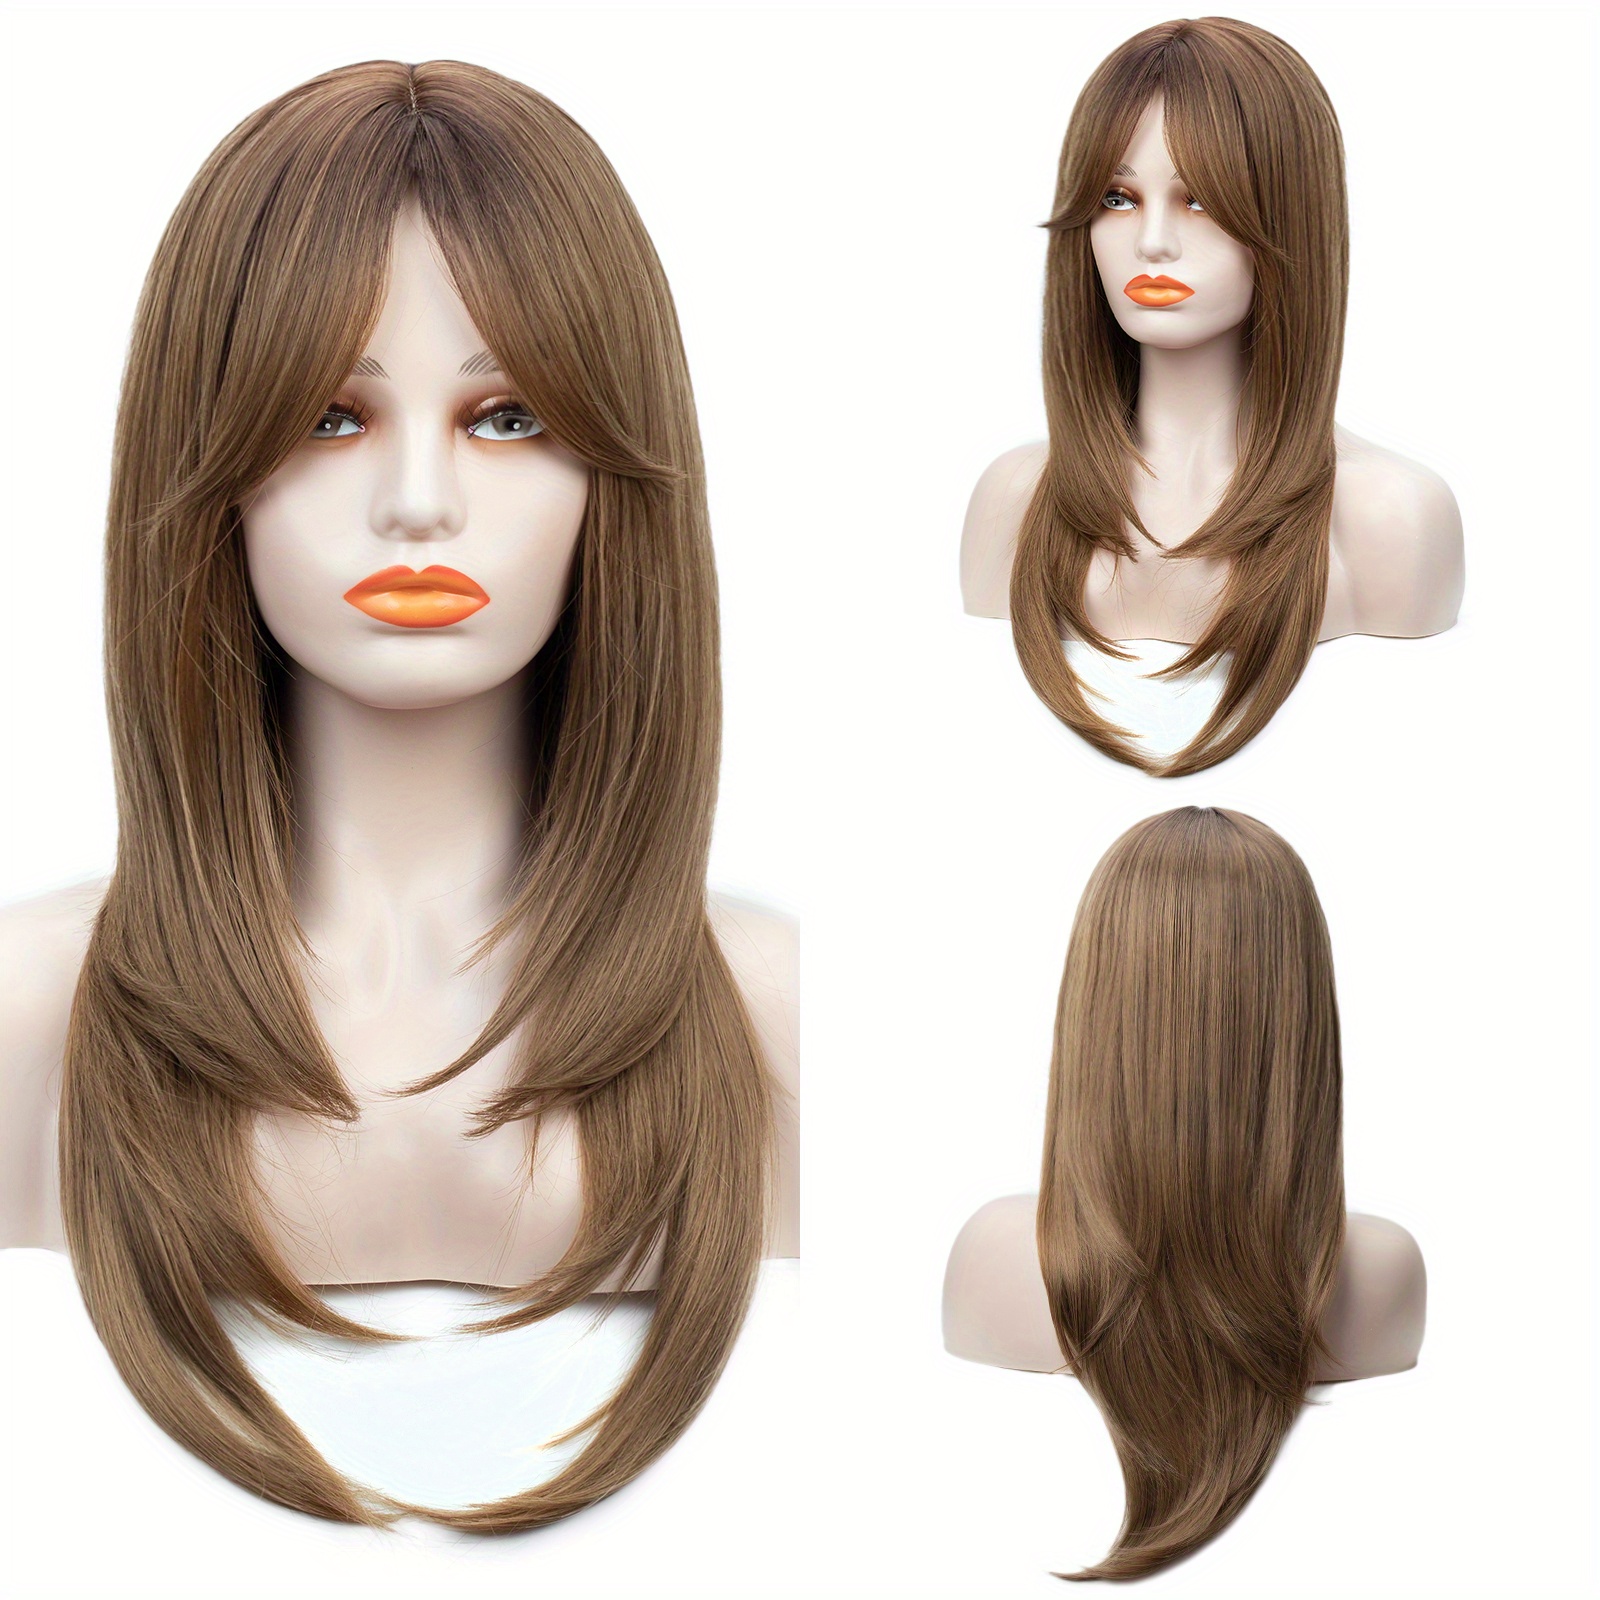 HAIRJOY Cabelo sintético Long Straight Layered Haircut Mulheres Ombre Wig  Side Parte Bangs